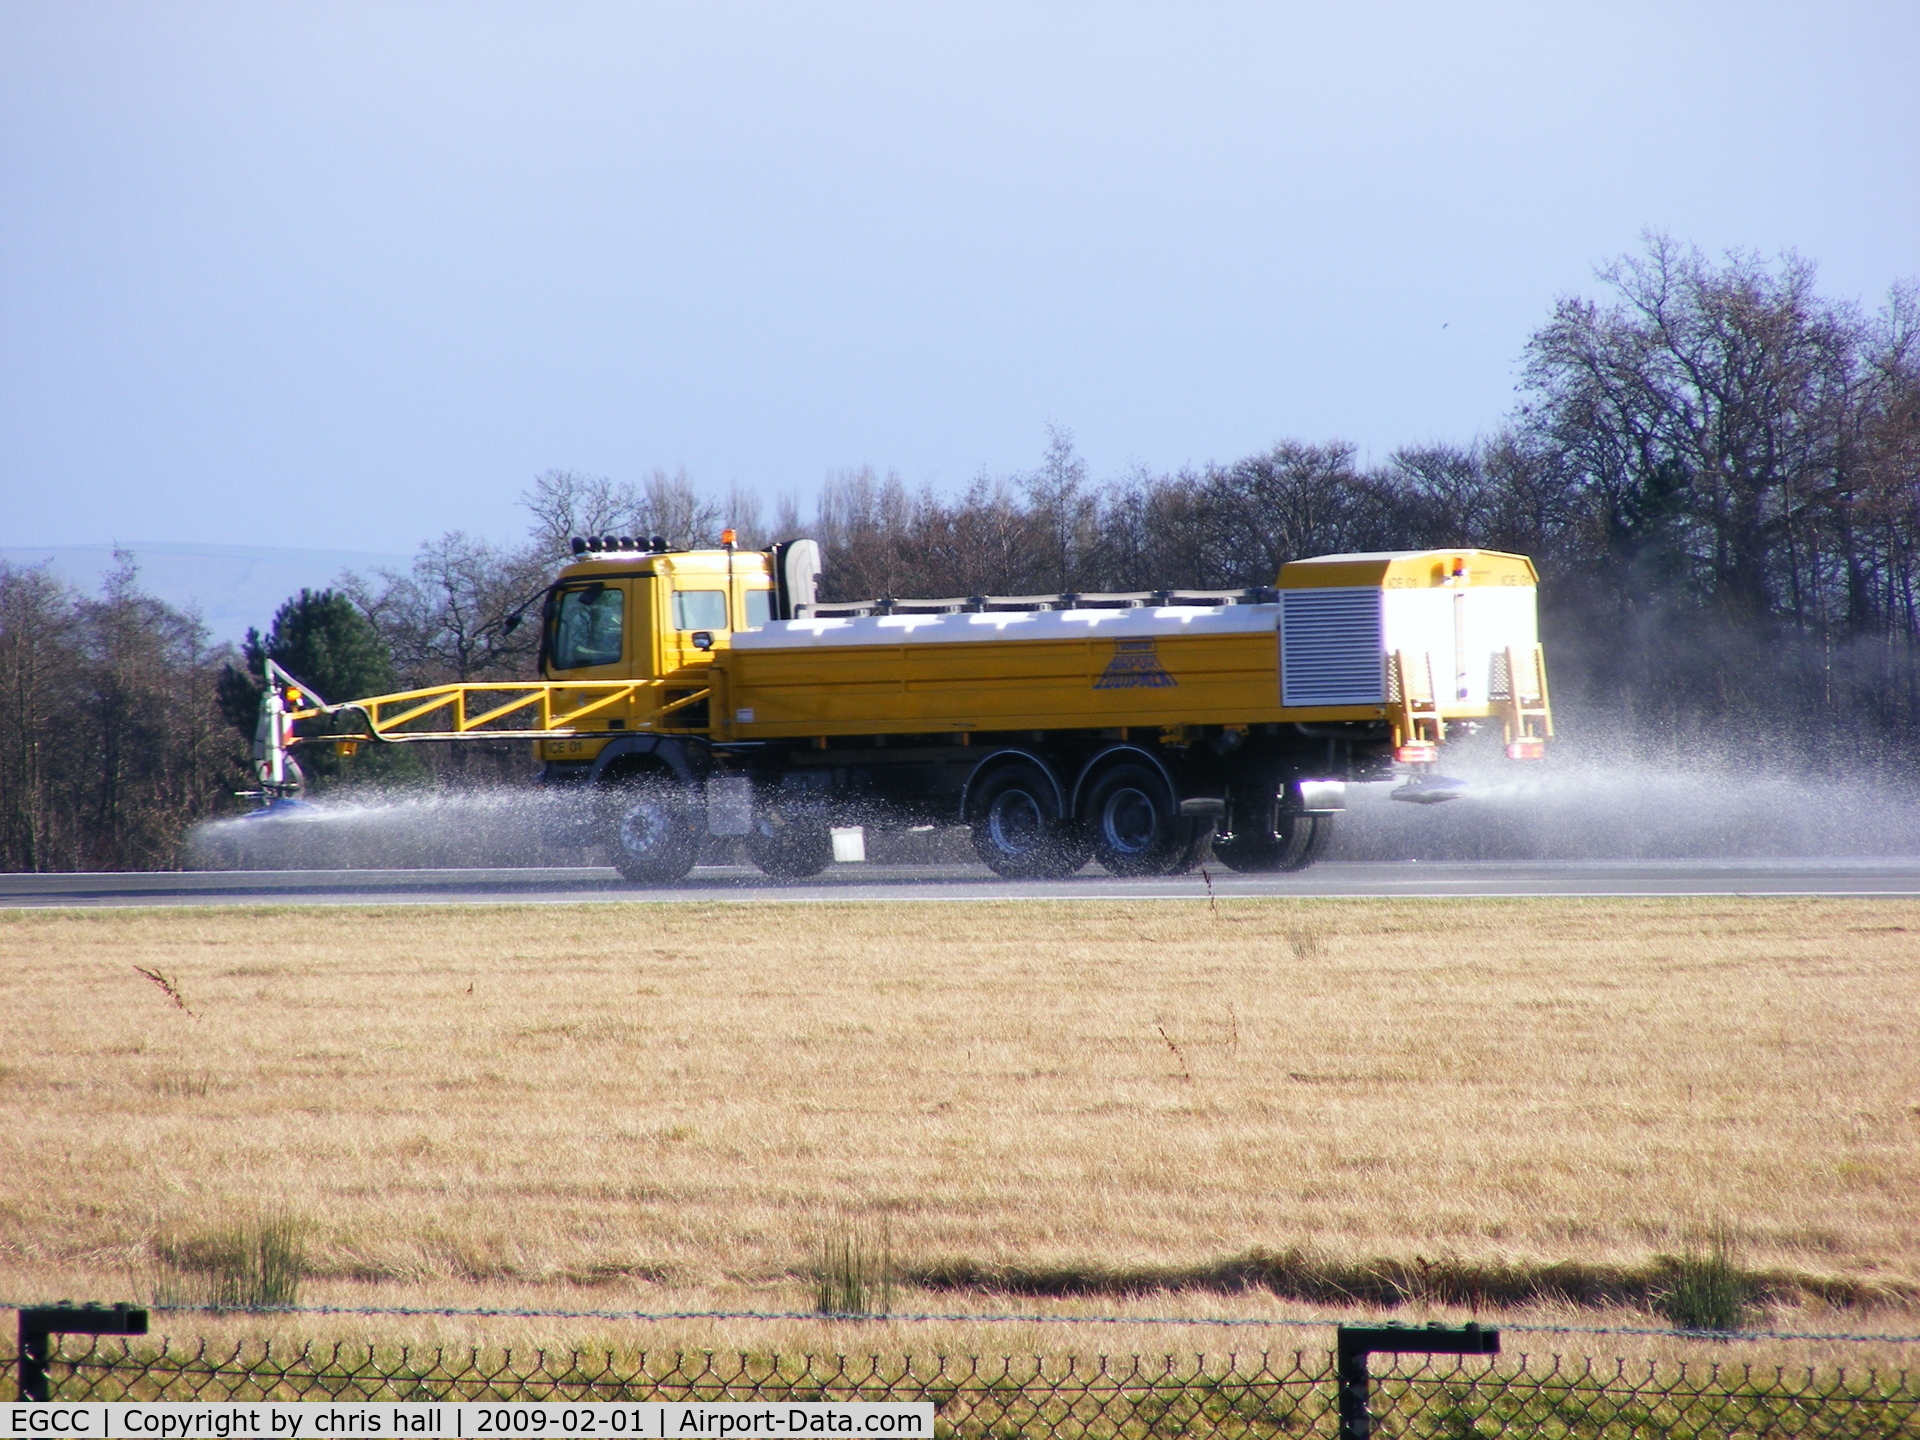 Manchester Airport, Manchester, England United Kingdom (EGCC) - Spraying deicer on the runway 